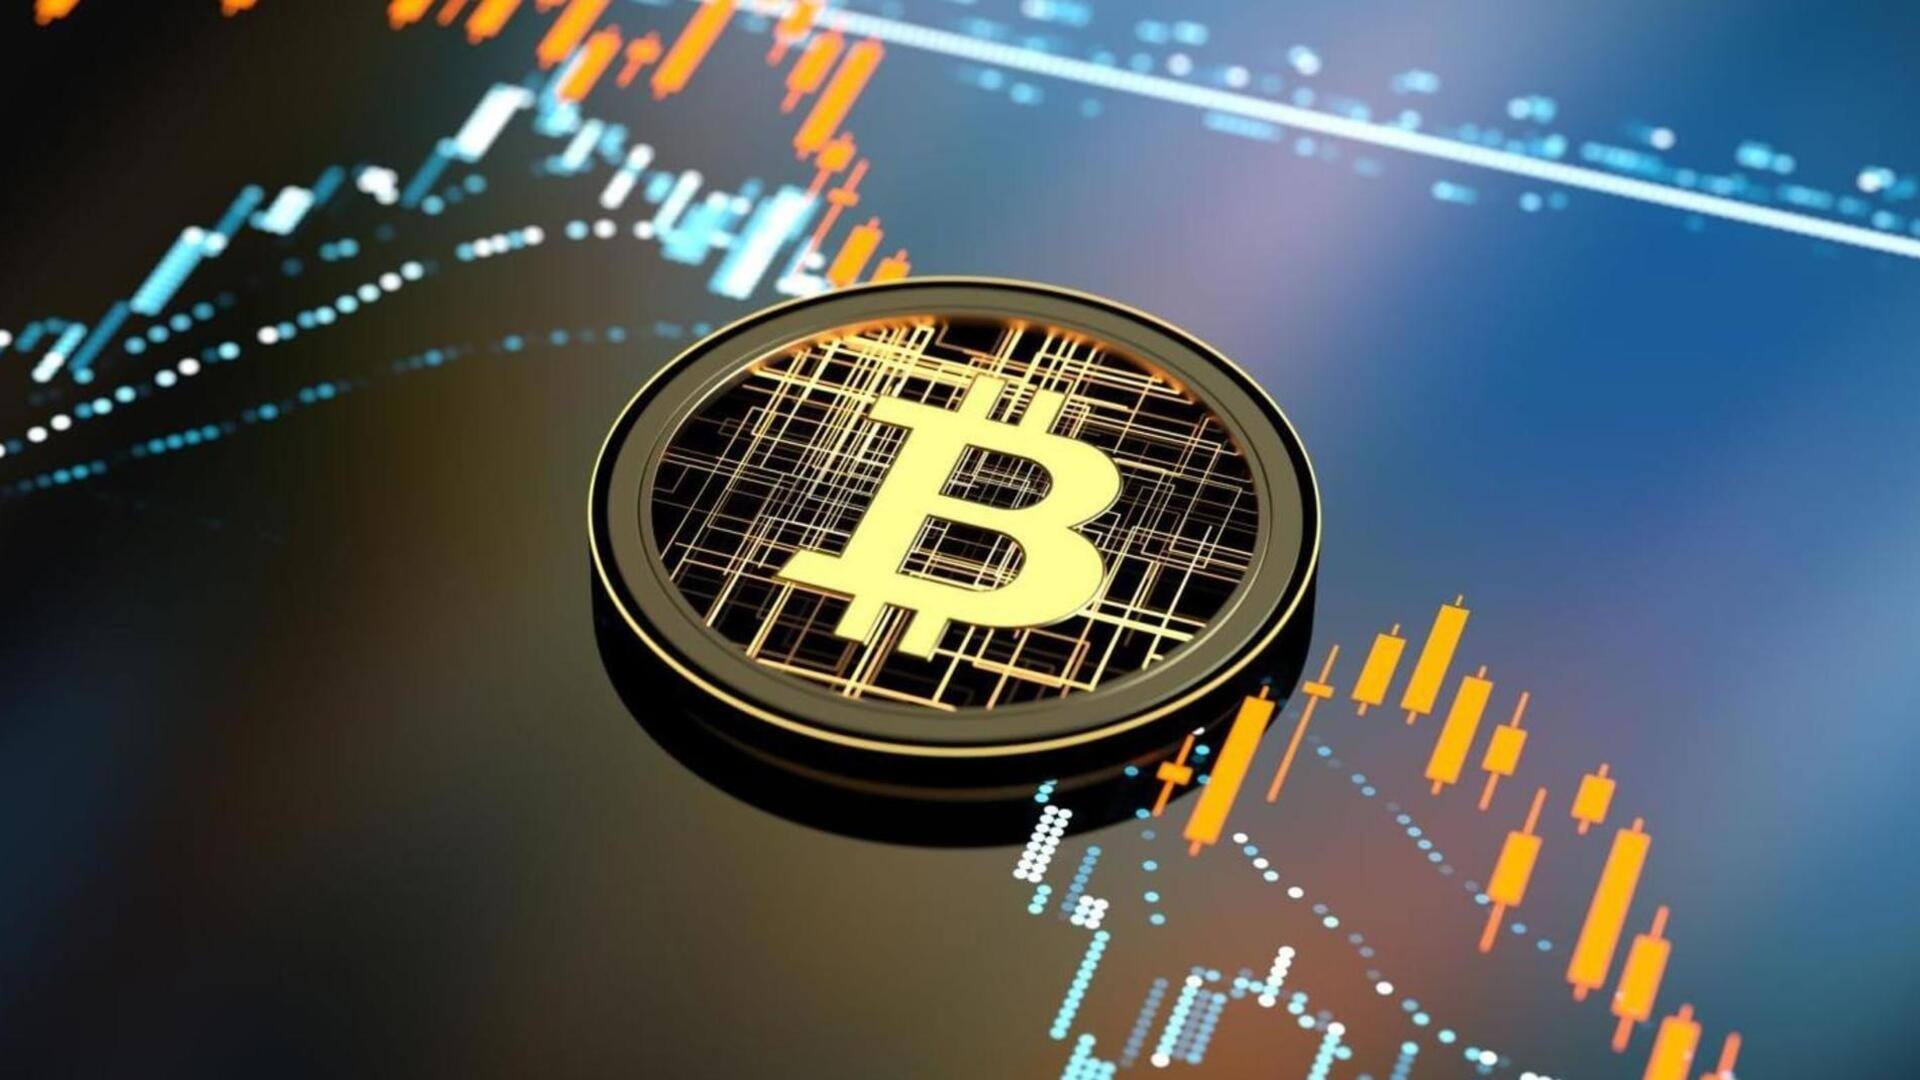 Bitcoin gains over 12% to hit 18-month high